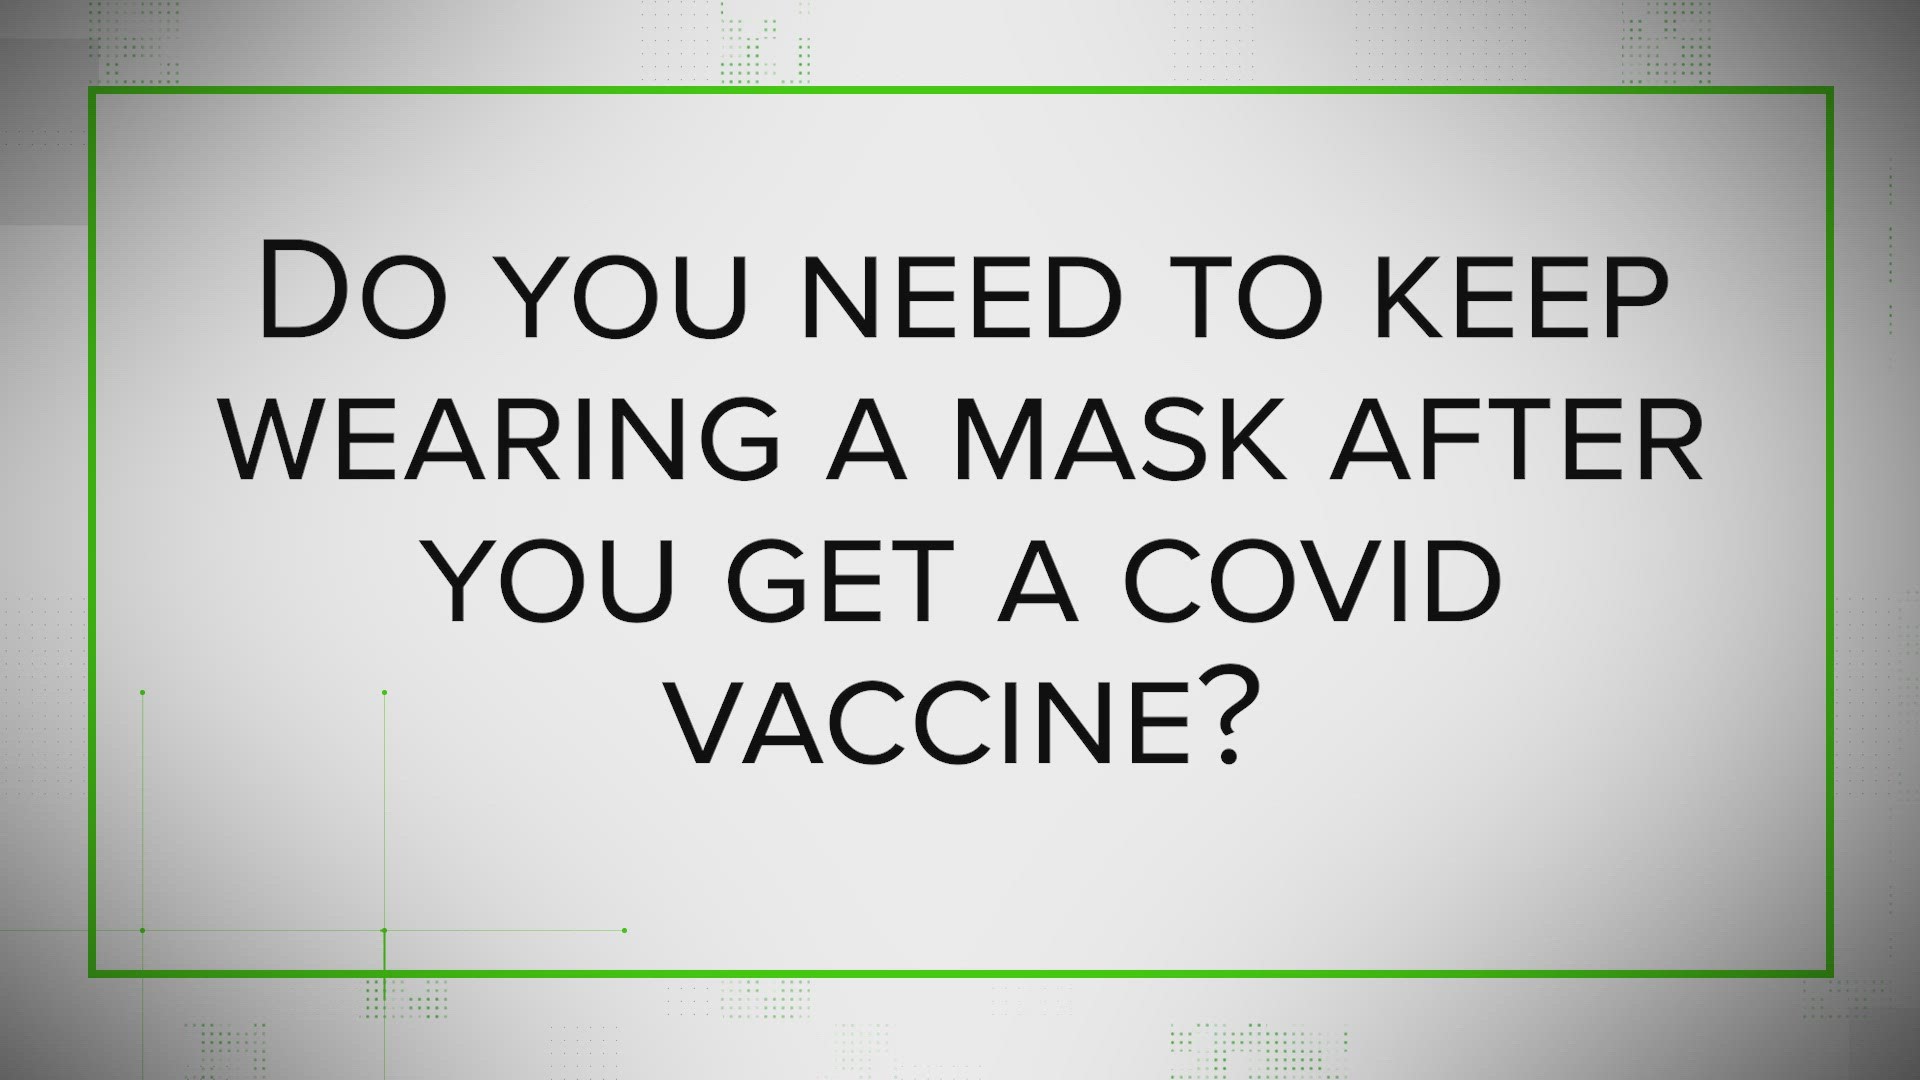 While the COVID-19 vaccine should prevent you from getting ill, health experts don't know if it will prevent you from spreading the virus.